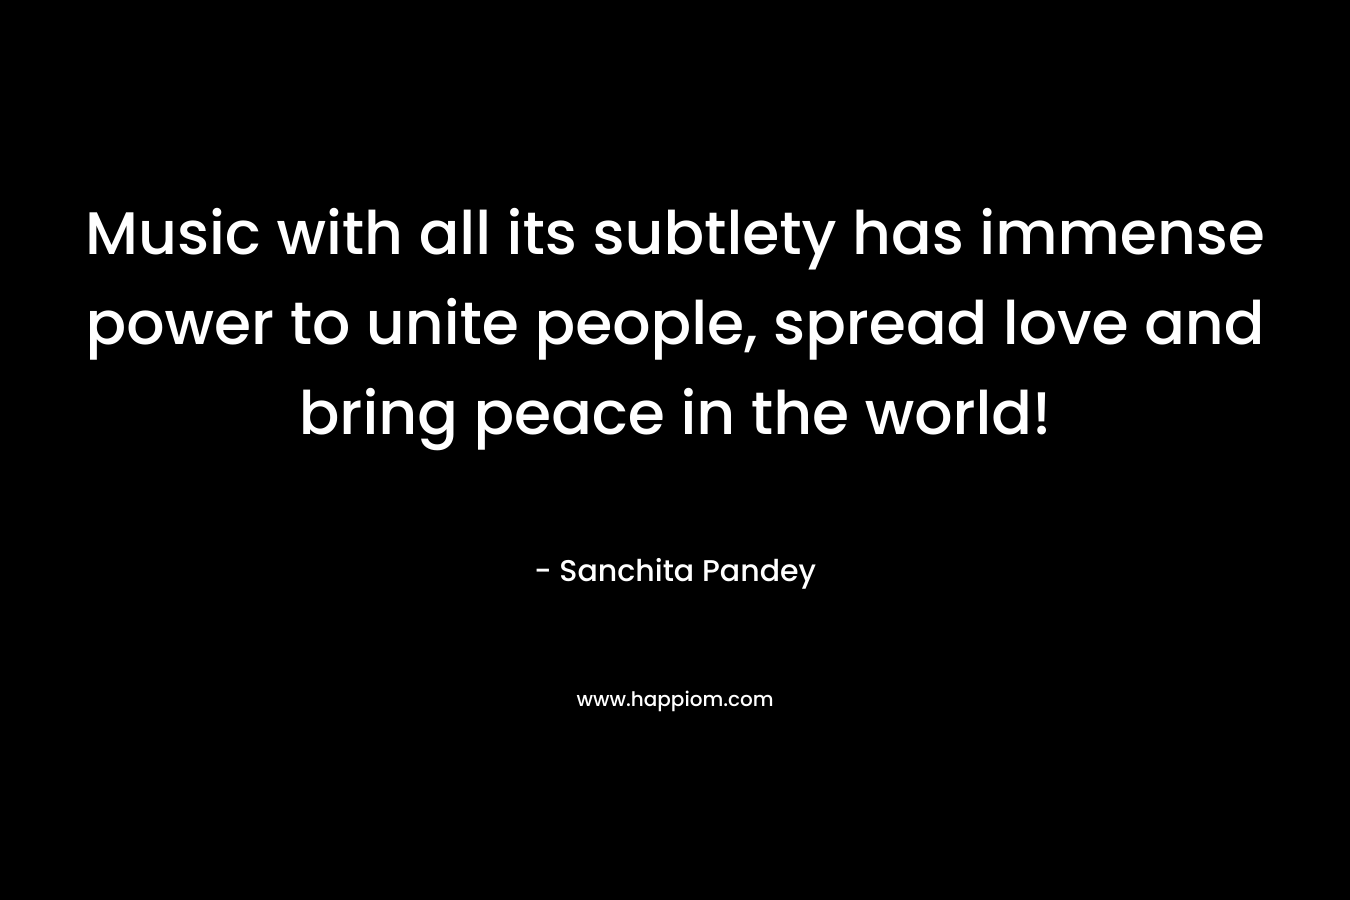 Music with all its subtlety has immense power to unite people, spread love and bring peace in the world!